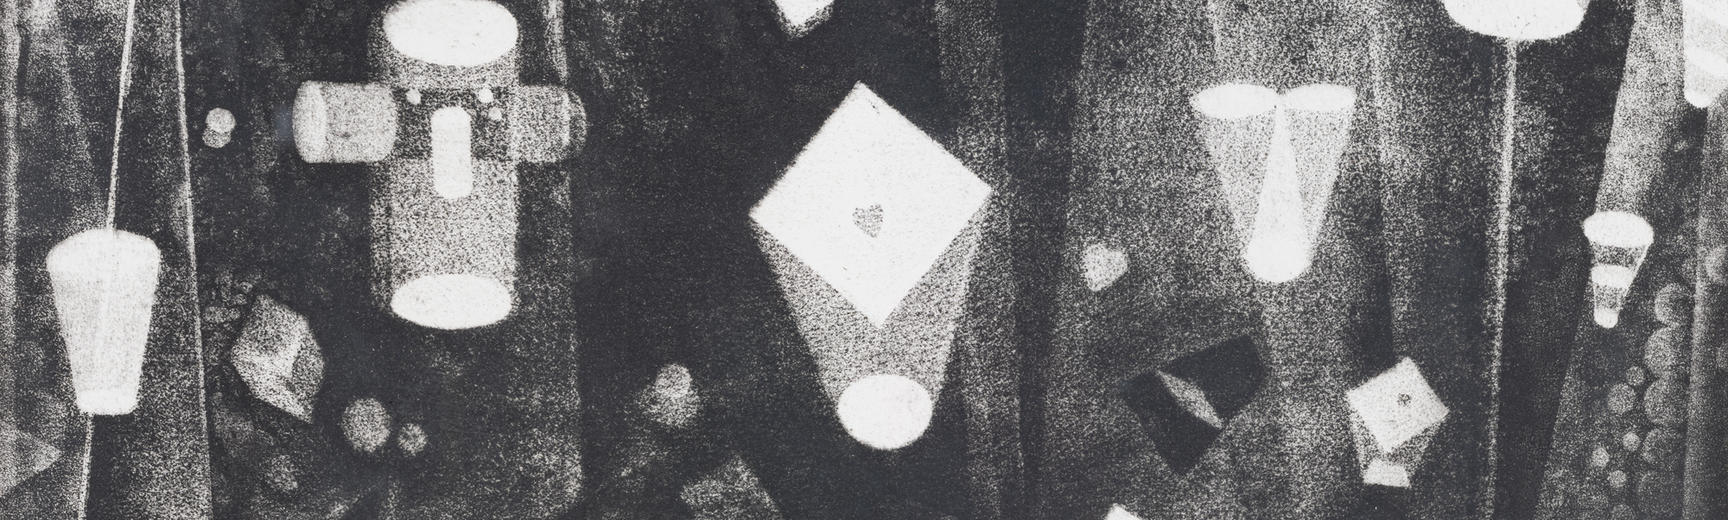 A black and white etching of various wandering 3D shapes drifting in space